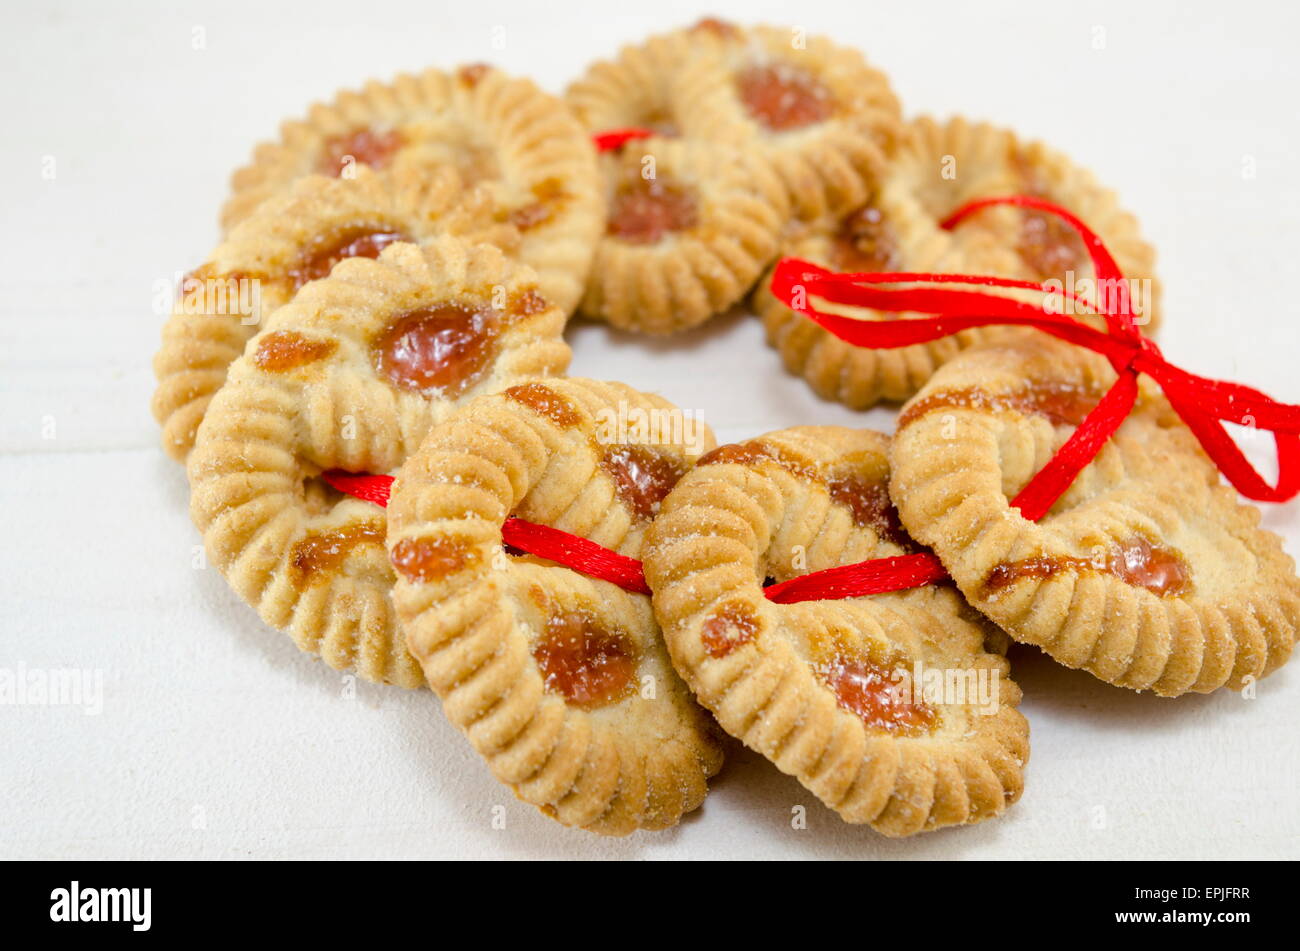 Tea biscuits filled with apricot jam on white connected with a red ribbon Stock Photo